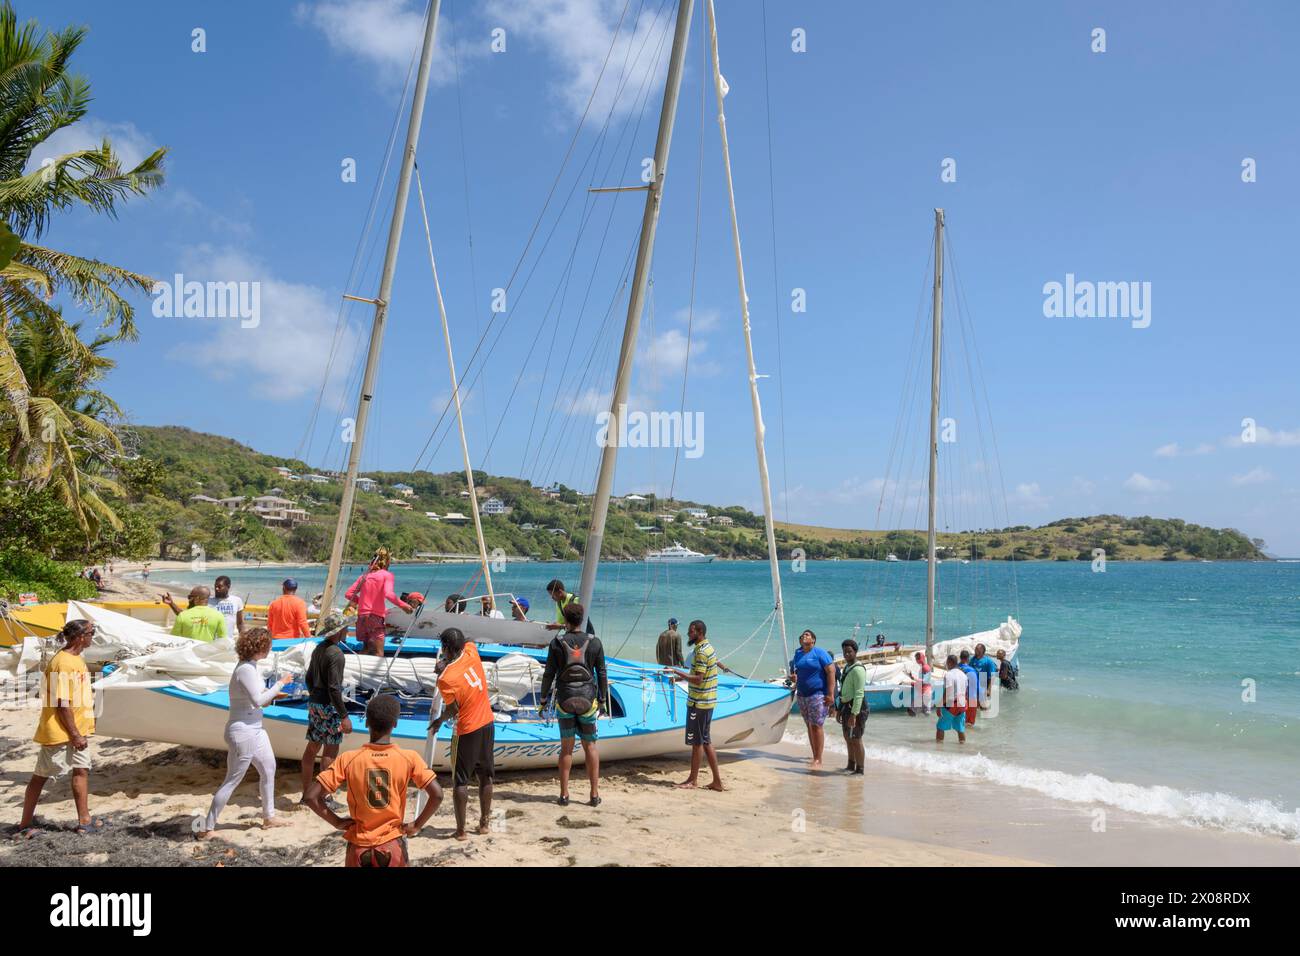 Sunday yacht race in Friendship Bay, Bequia Island, St Vincent & the ...